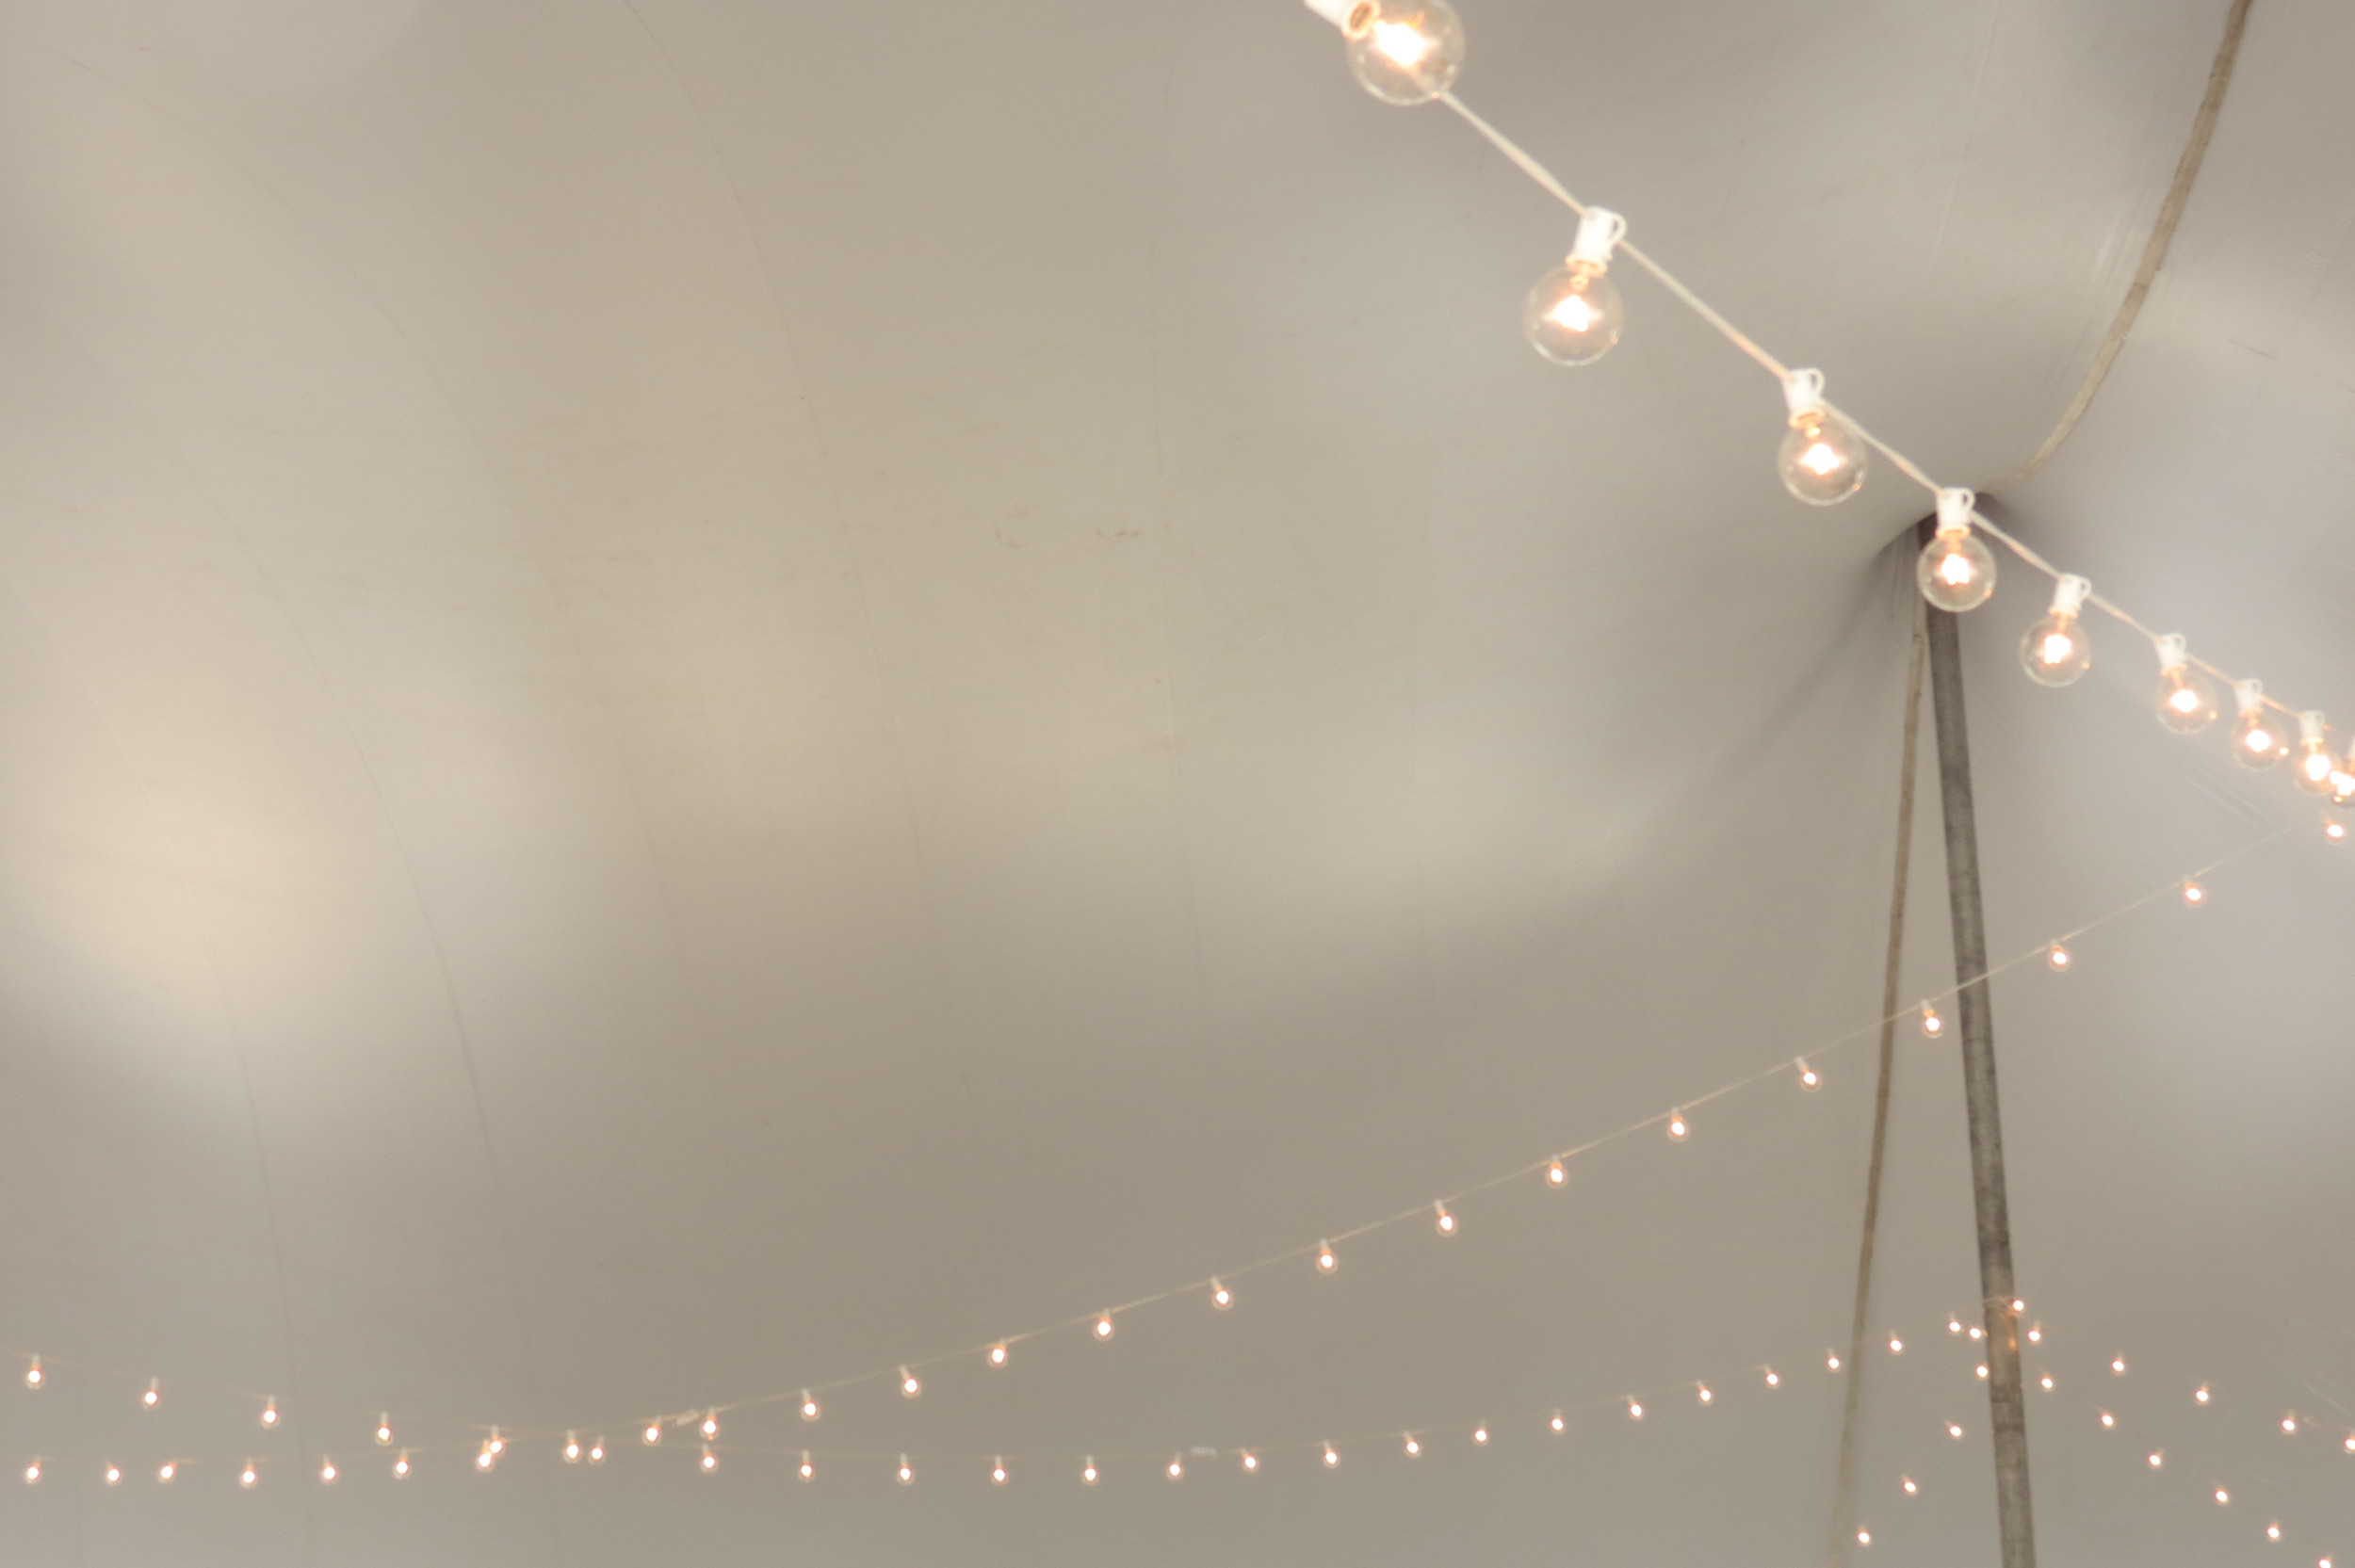 Lighting and party rentals in Carlisle